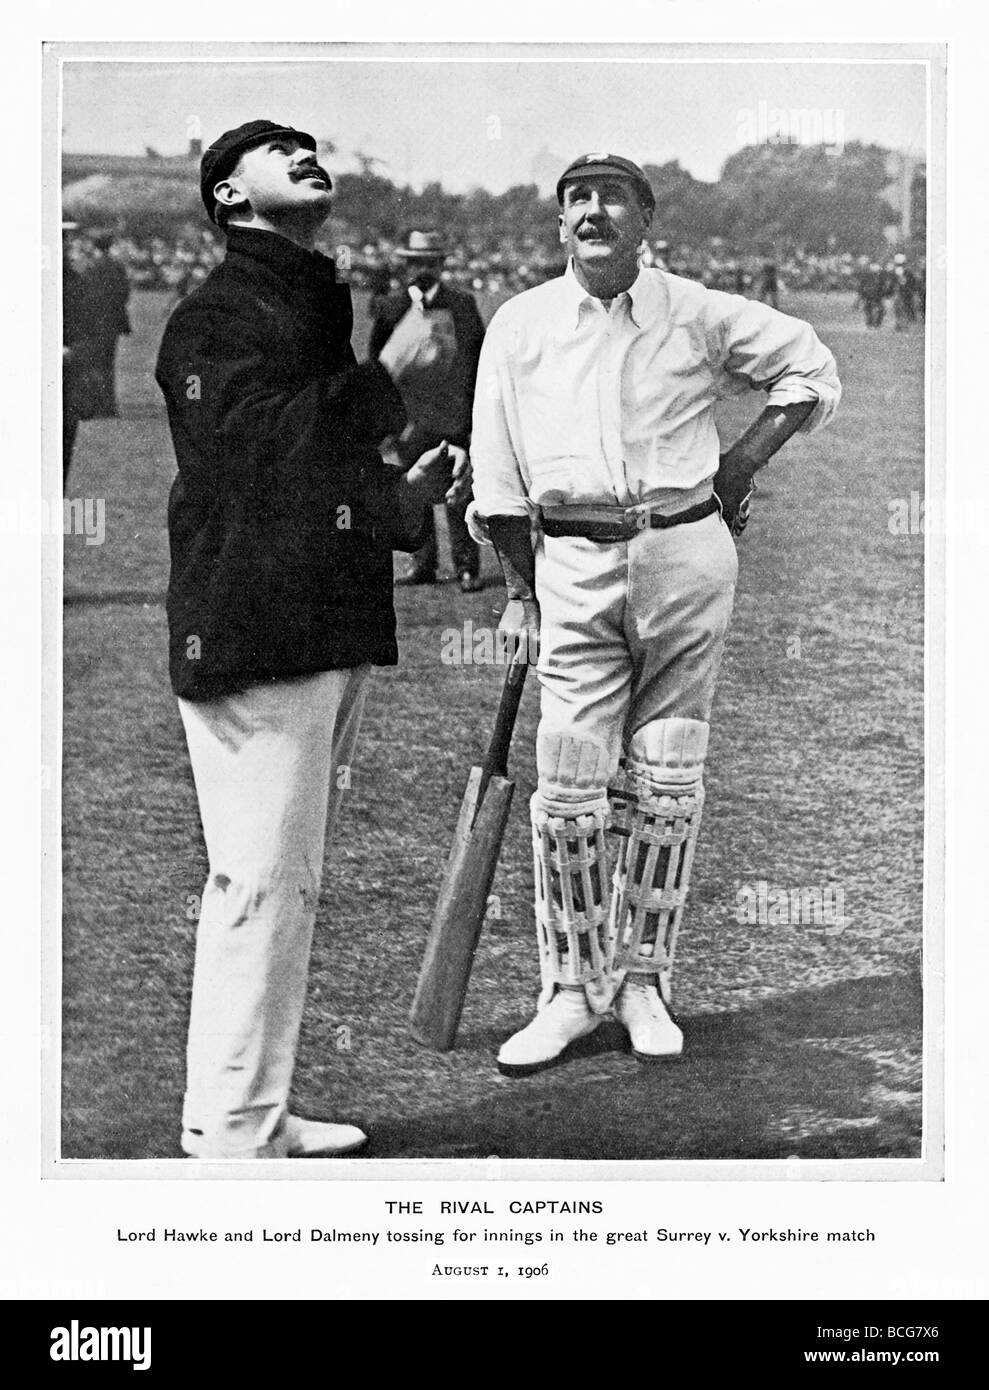 The Rival Captains Lords Hawke and Dalmeny tossing for innings in the Surrey v Yorkshire county cricket match of 1906 Stock Photo